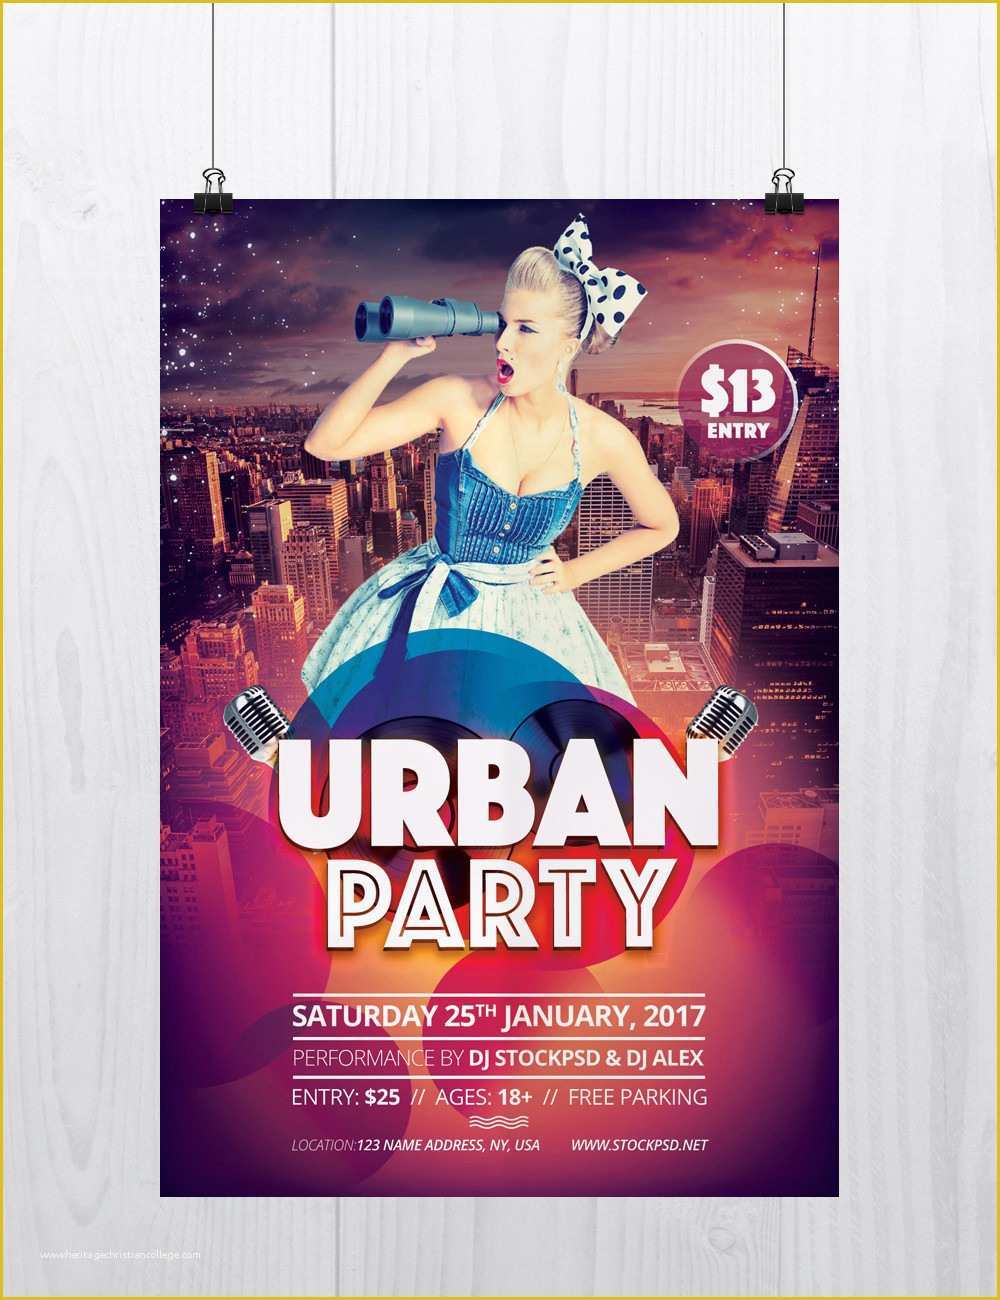 Event Flyer Templates Free Download Of Urban Party Download Free Psd Flyer Template Stockpsd